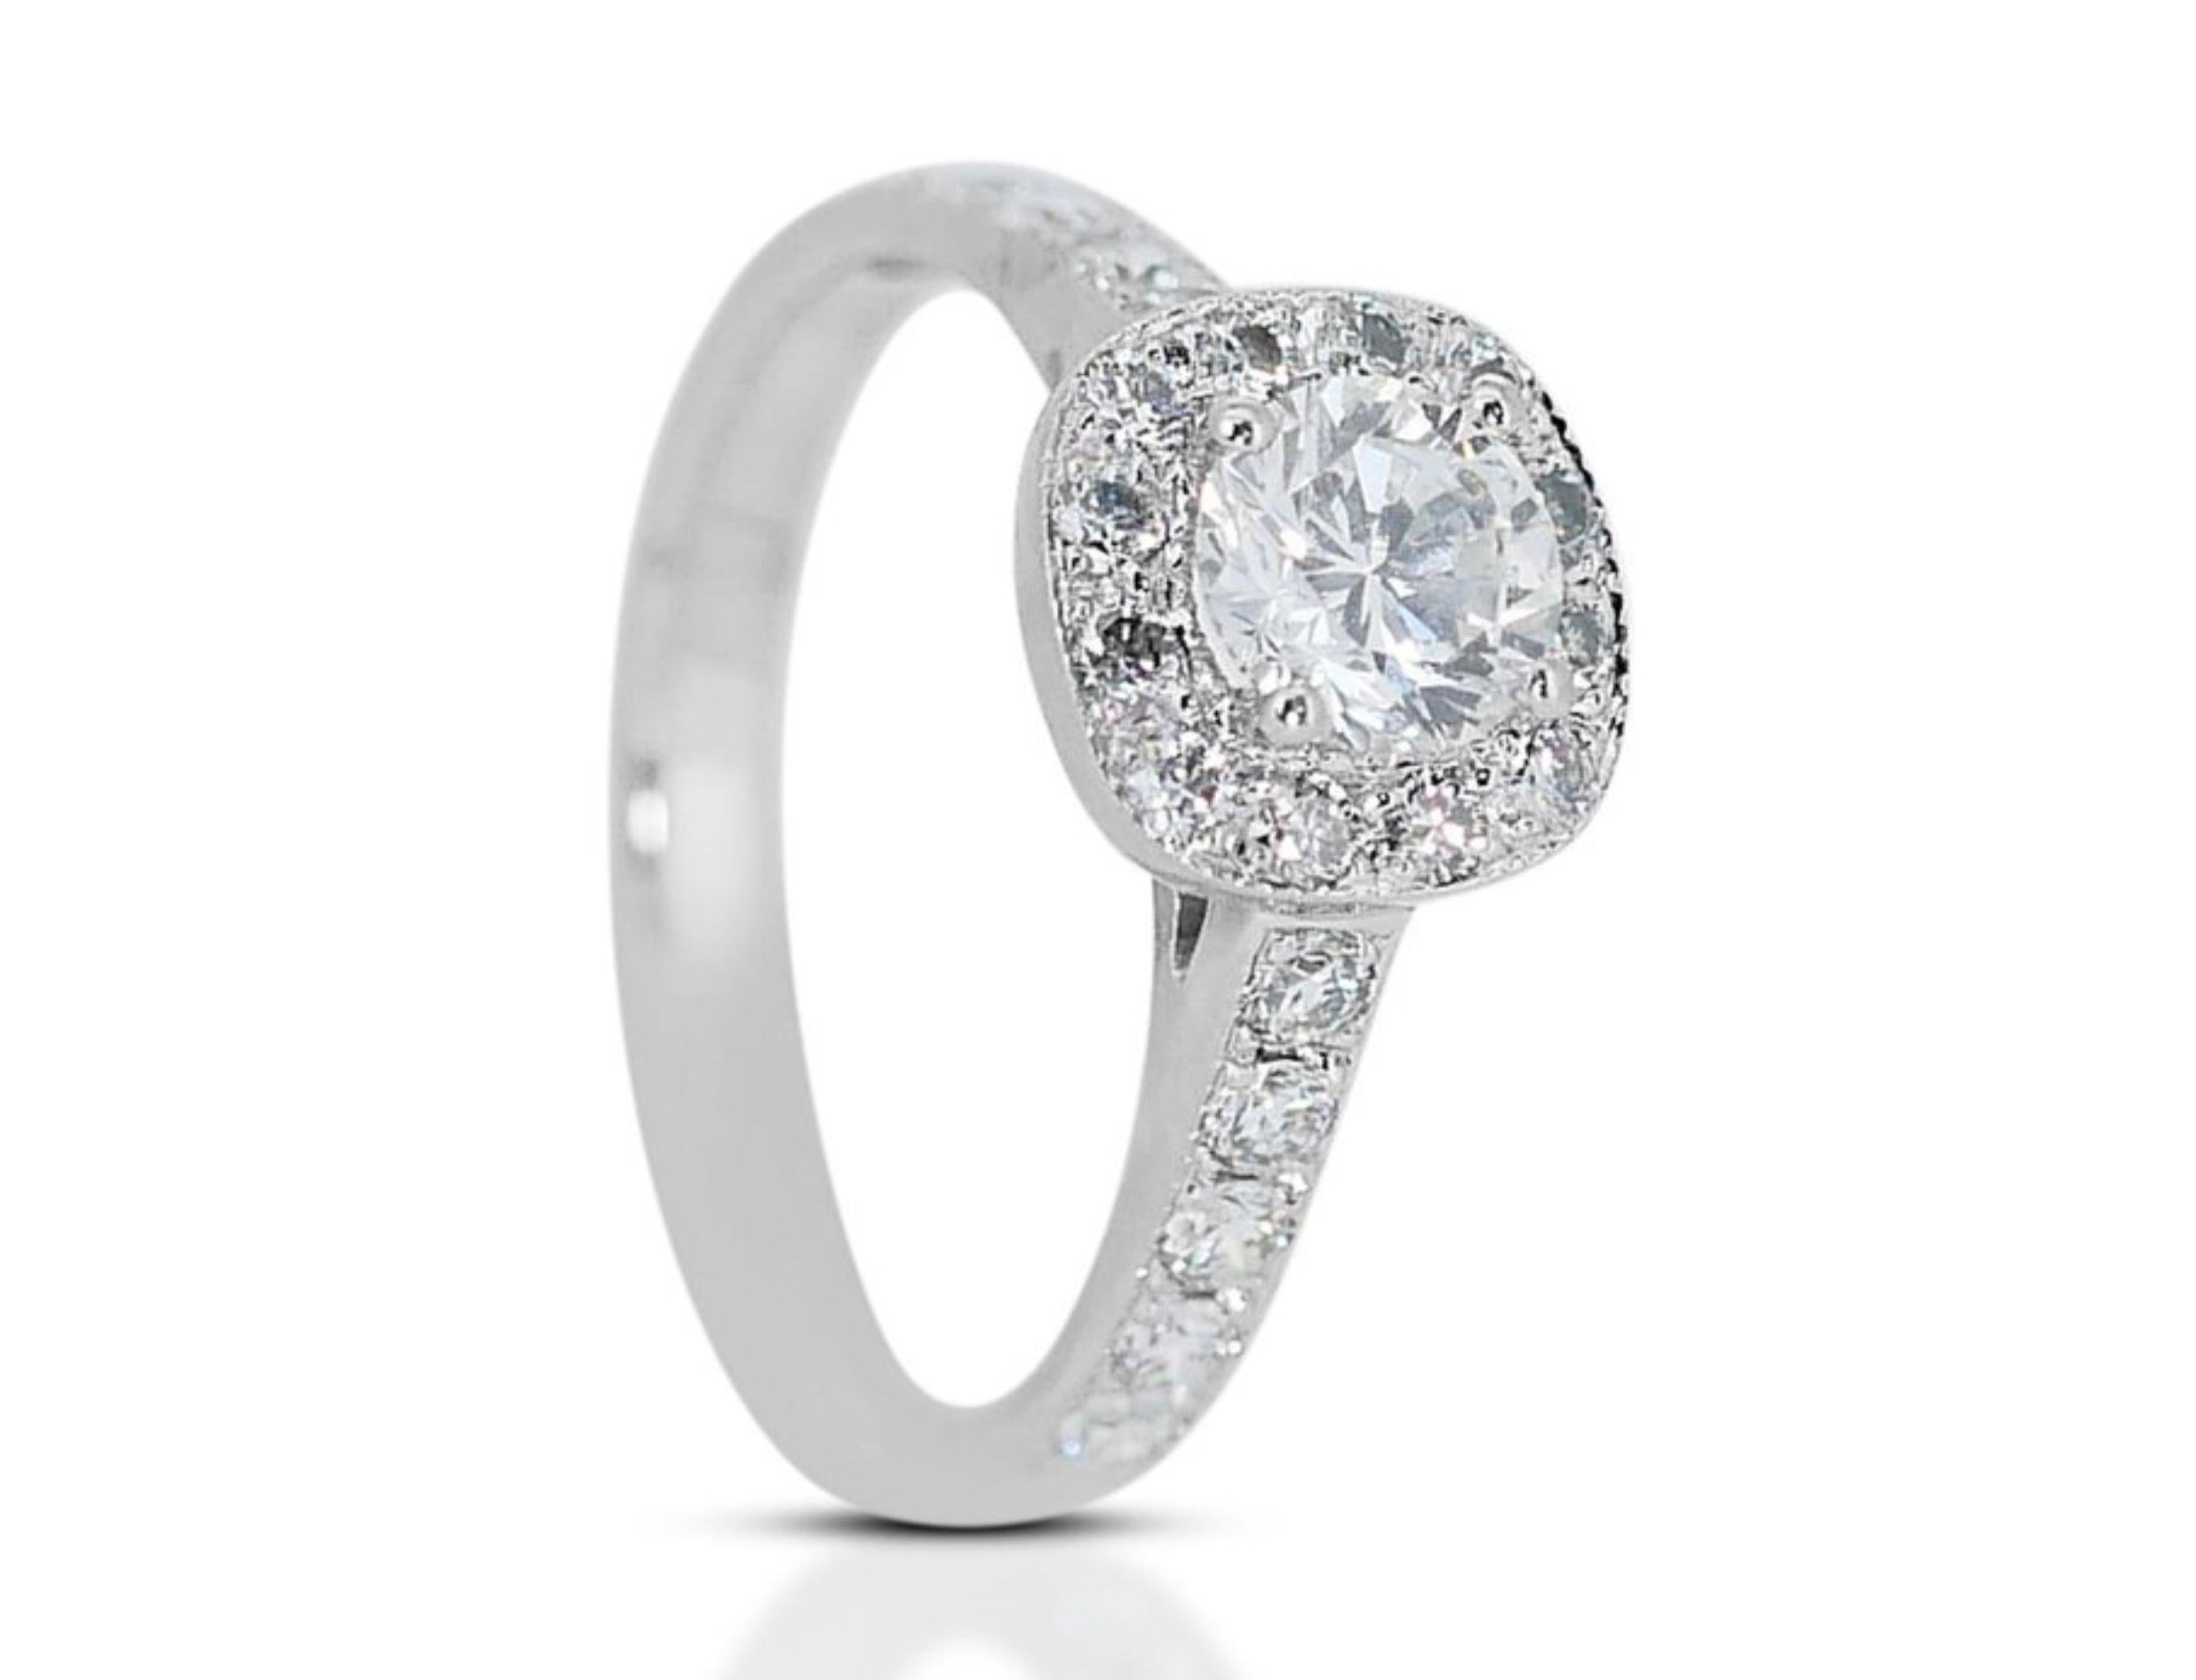 Captivating 0.52ct Pave Diamond Ring set in 18K White Gold For Sale 3